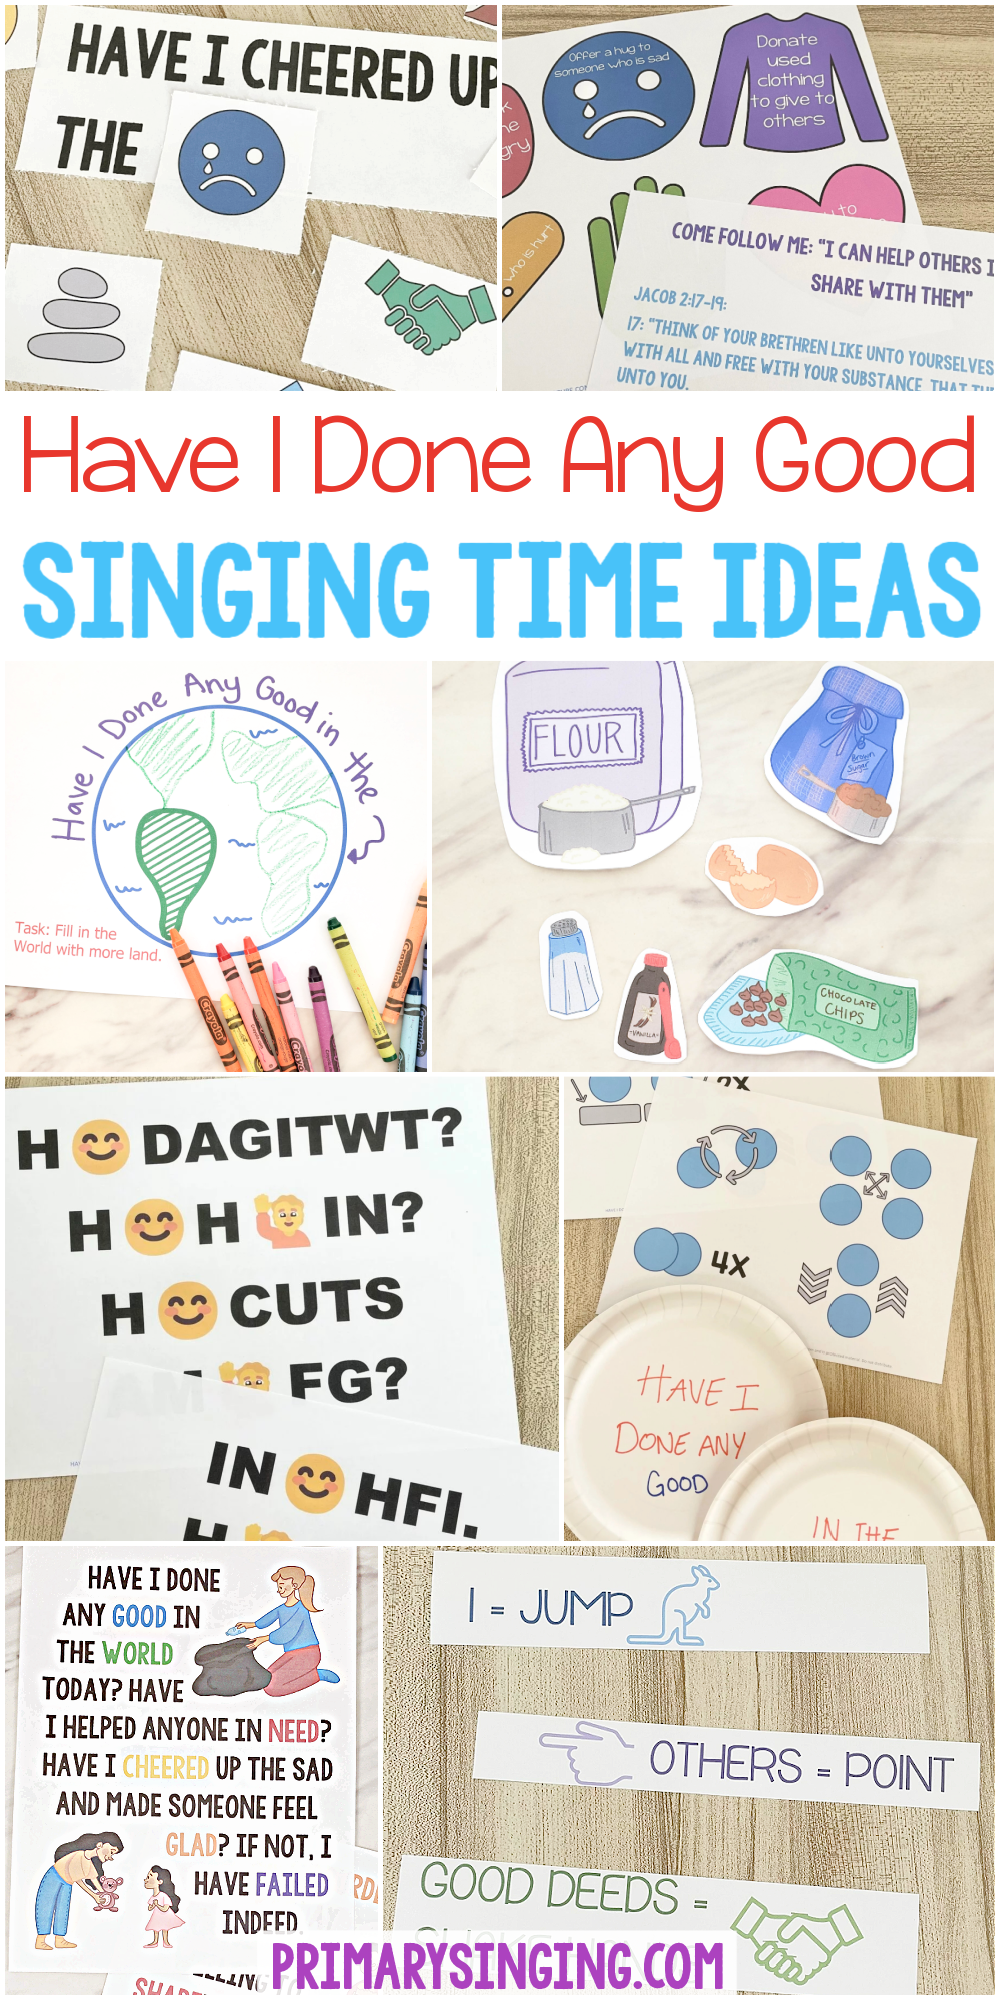 Have I Done Any Good Singing time packet for this beautiful primary song - easy ways for LDS Primary music leaders to teach this hymn including a beautiful custom art flip chart, finish the drawing, paper plates, first letters, choose the missing word, movement words, making cookies and more!